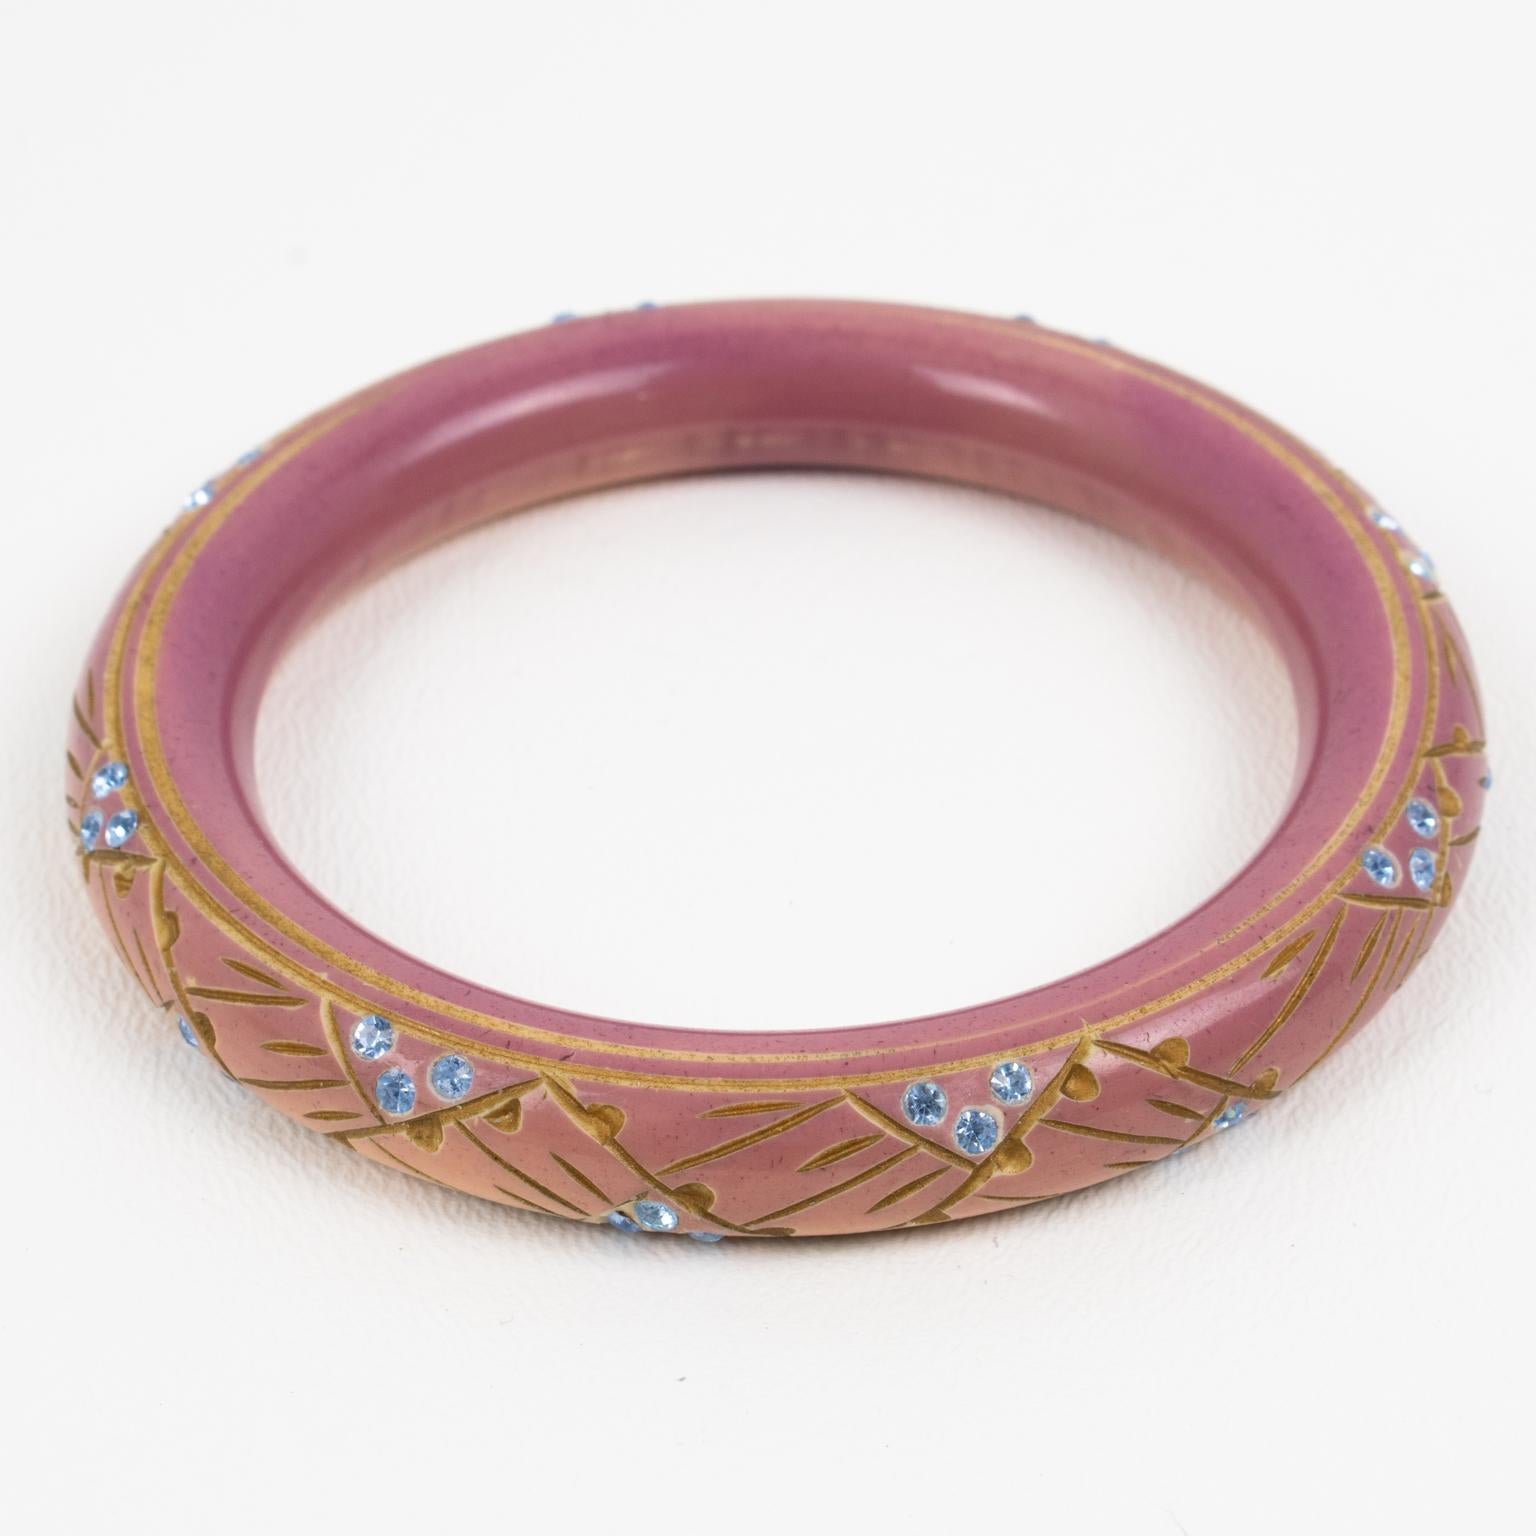 This lovely French Art Deco Galalith bracelet bangle boasts a geometric carved design, contrasted with gold paint application and complimented with baby blue crystal rhinestones. The piece has a tube shape and a superb rose beige color with an